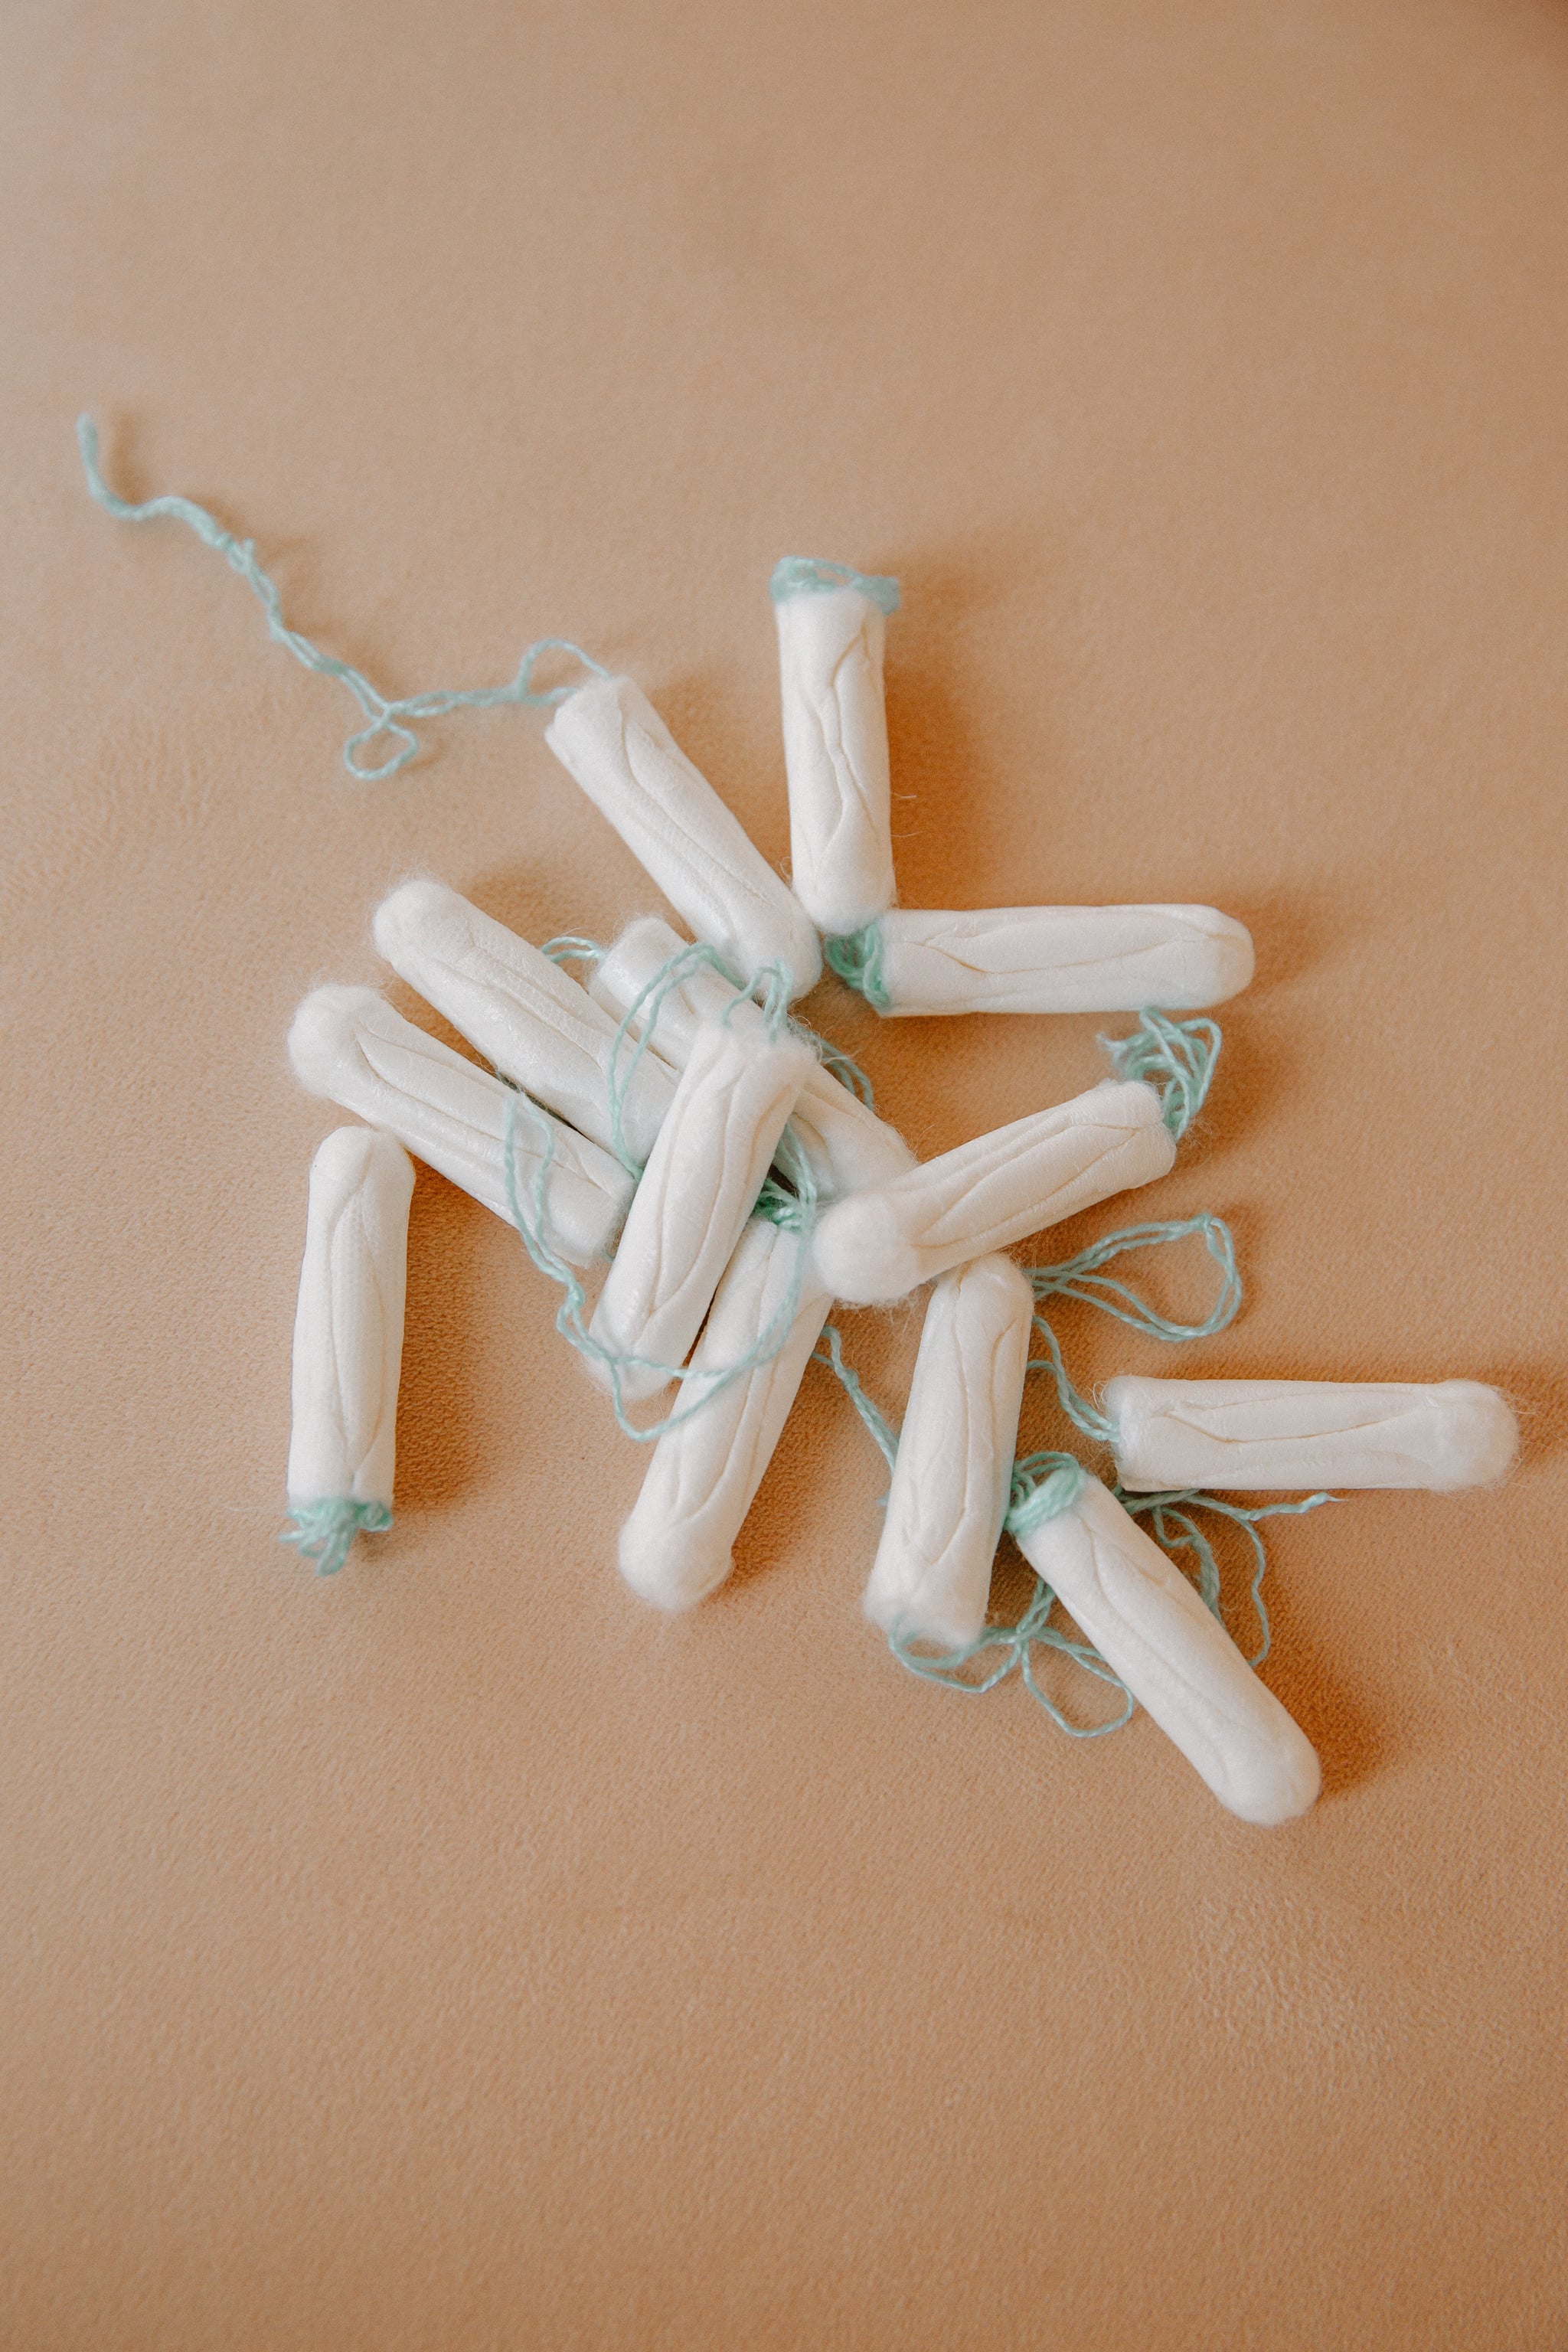 Can a Tampon Get Lost Inside My Body? Fitness